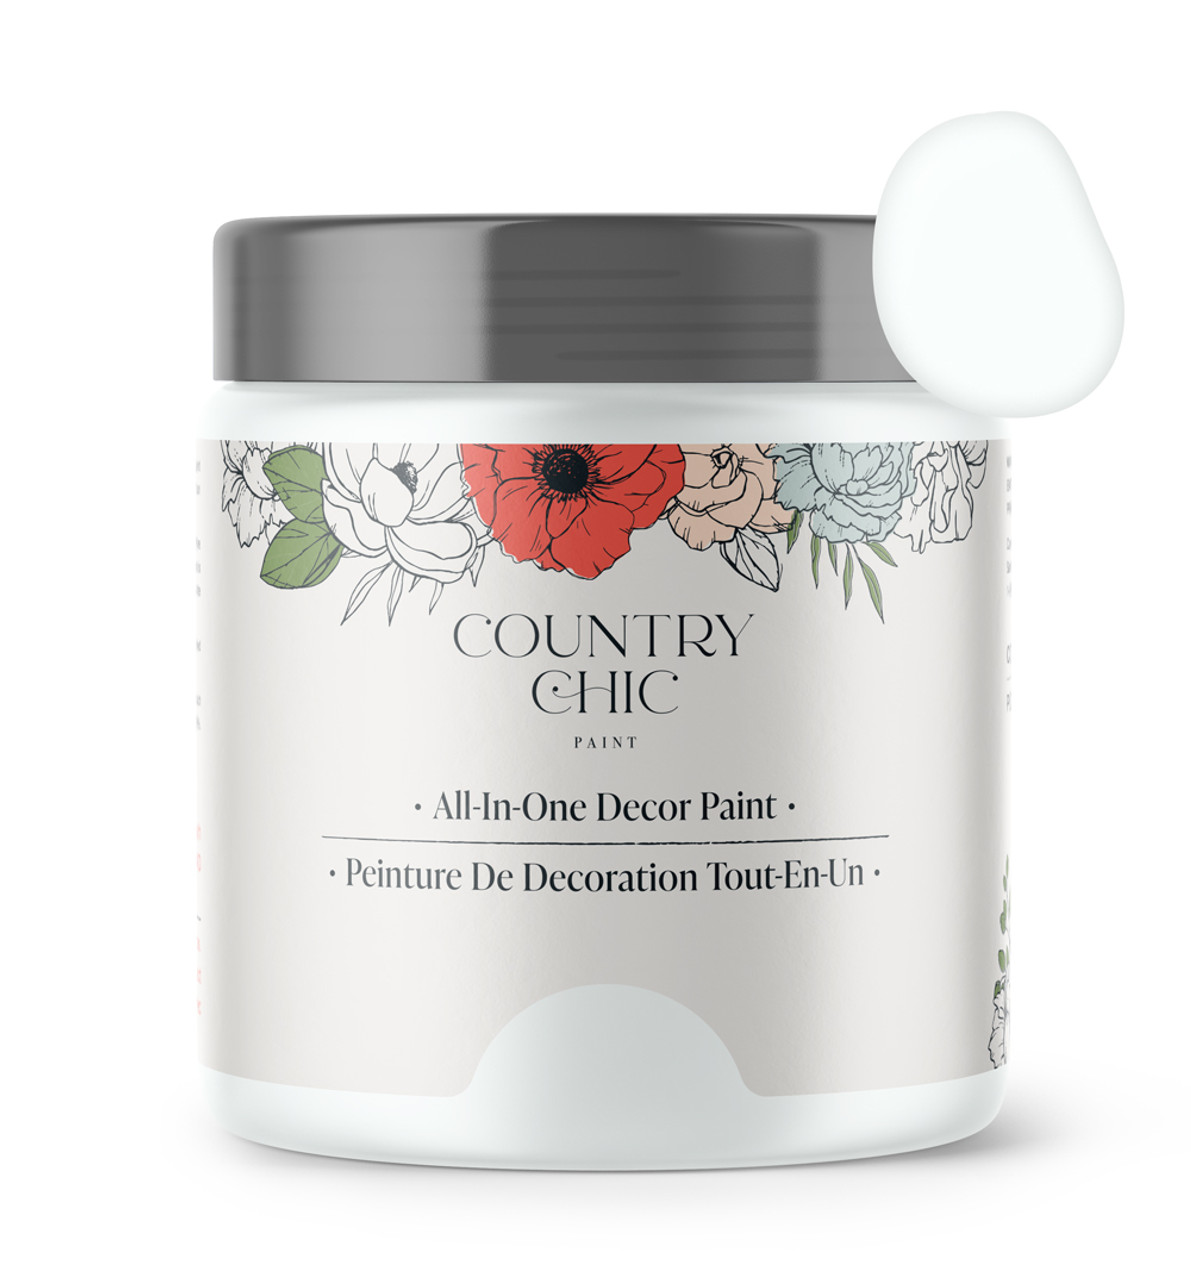 Are you wondering which colors might - Country Chic Paint